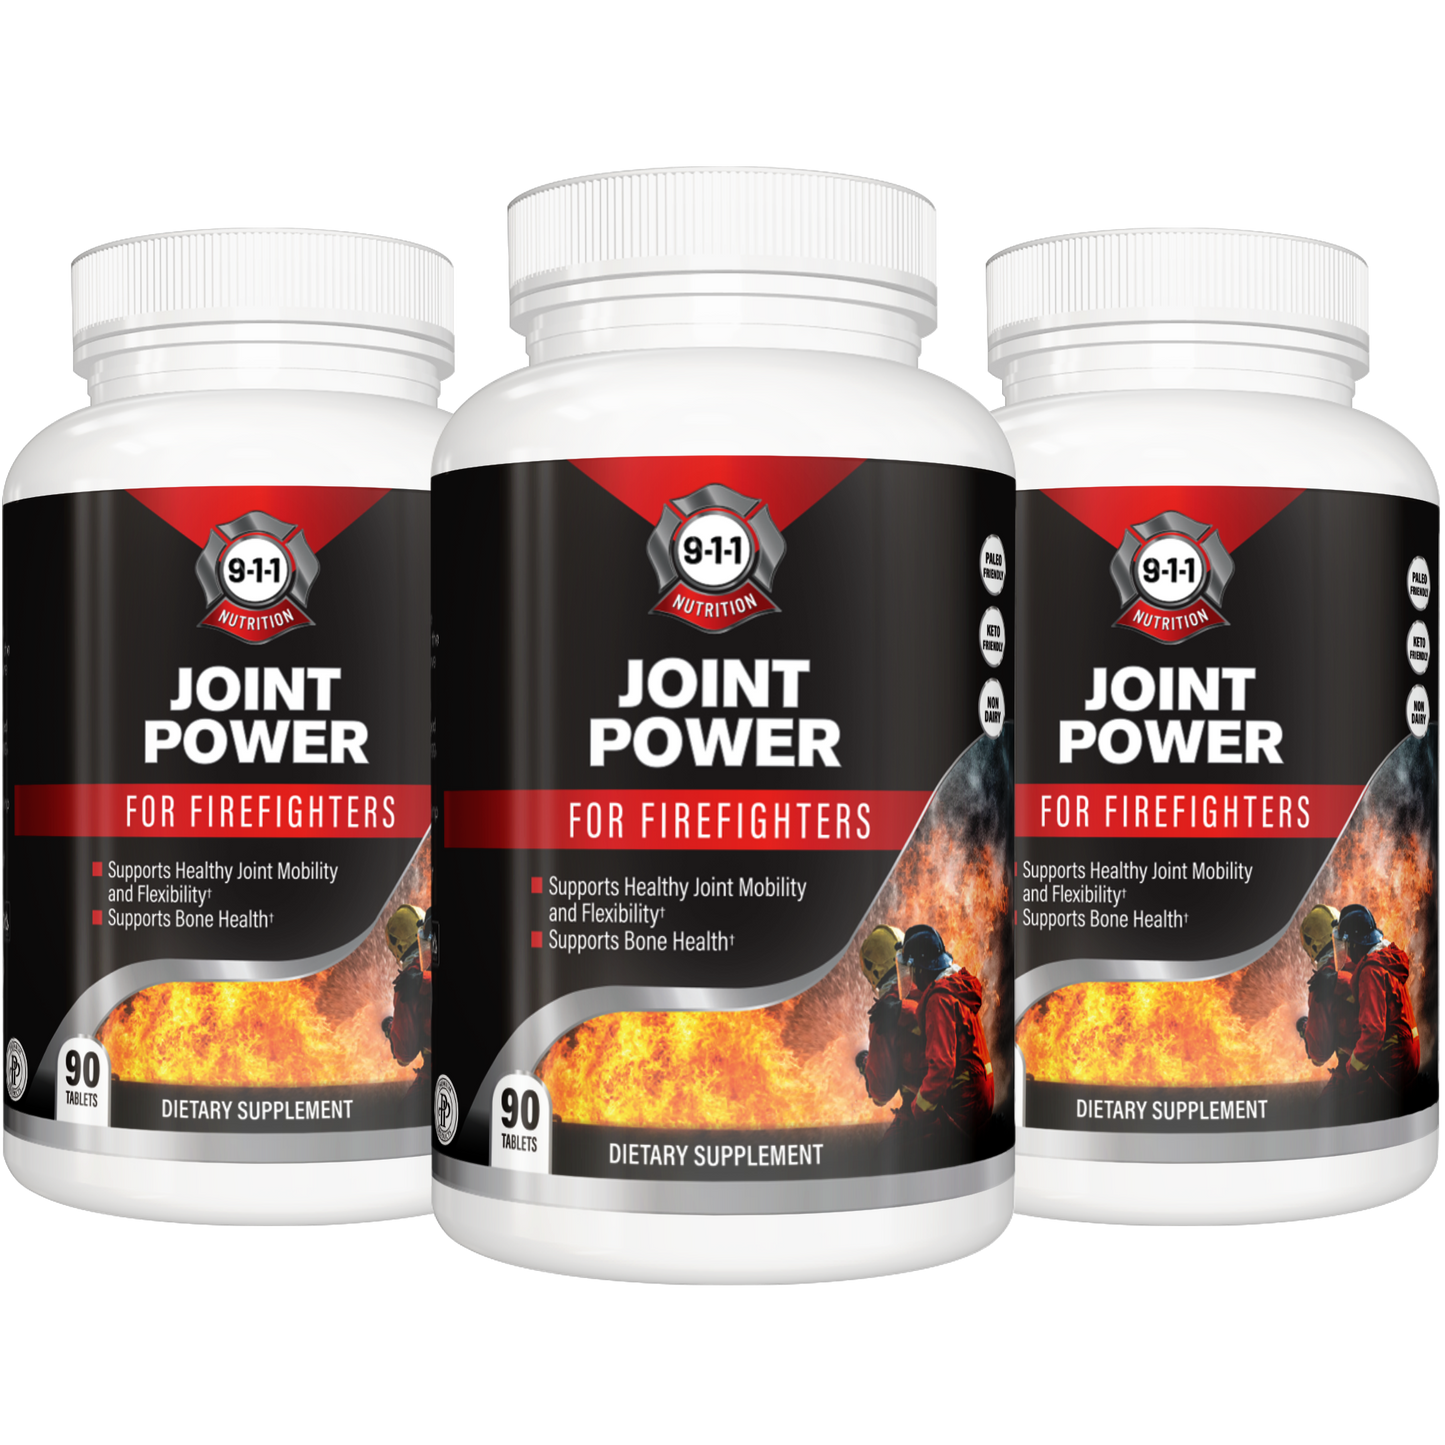 Healthy Joints